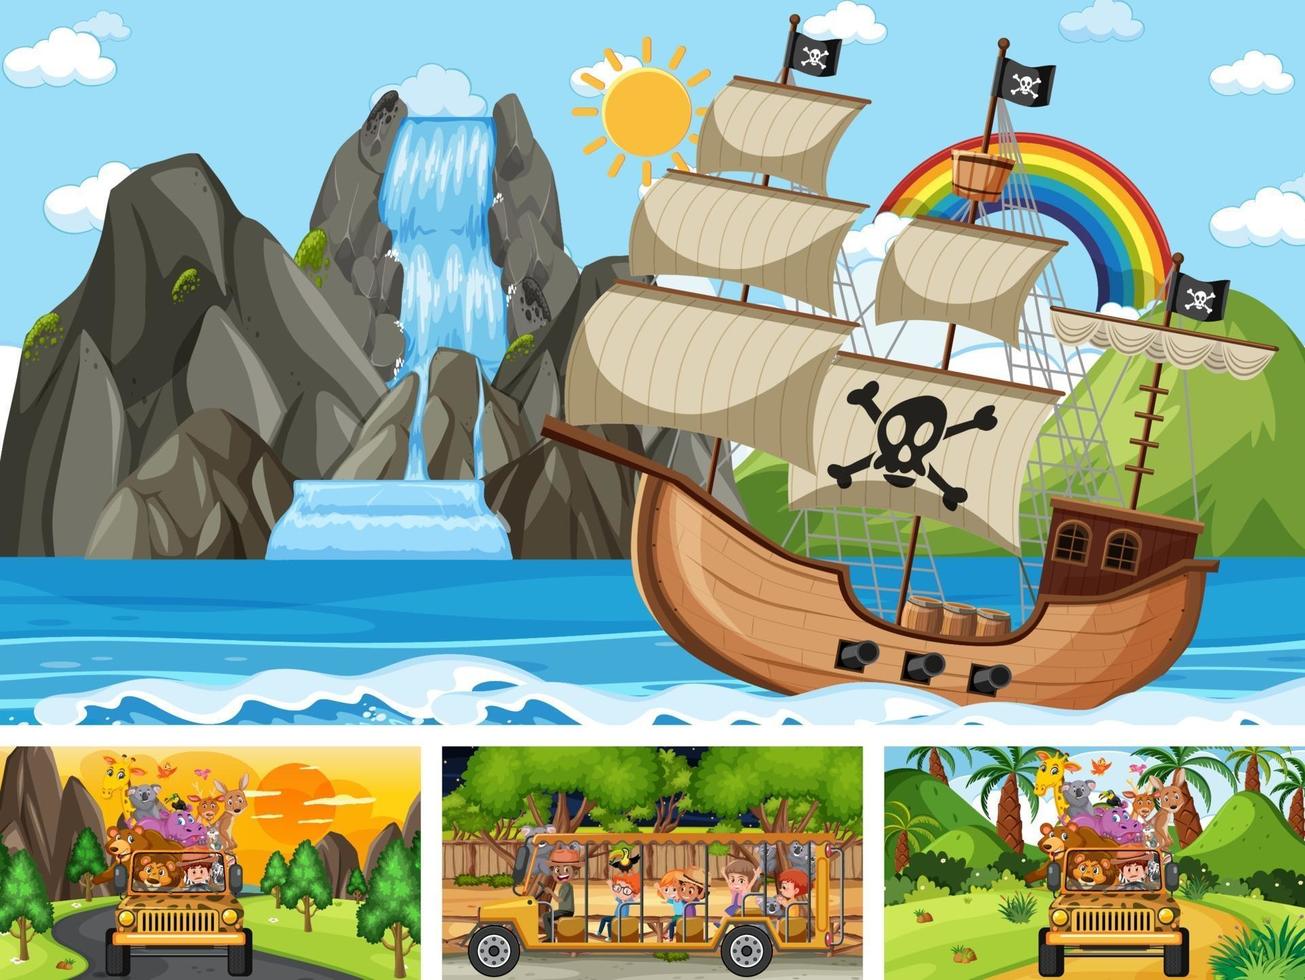 Set of different scenes with pirate ship at the sea and animals in the zoo vector